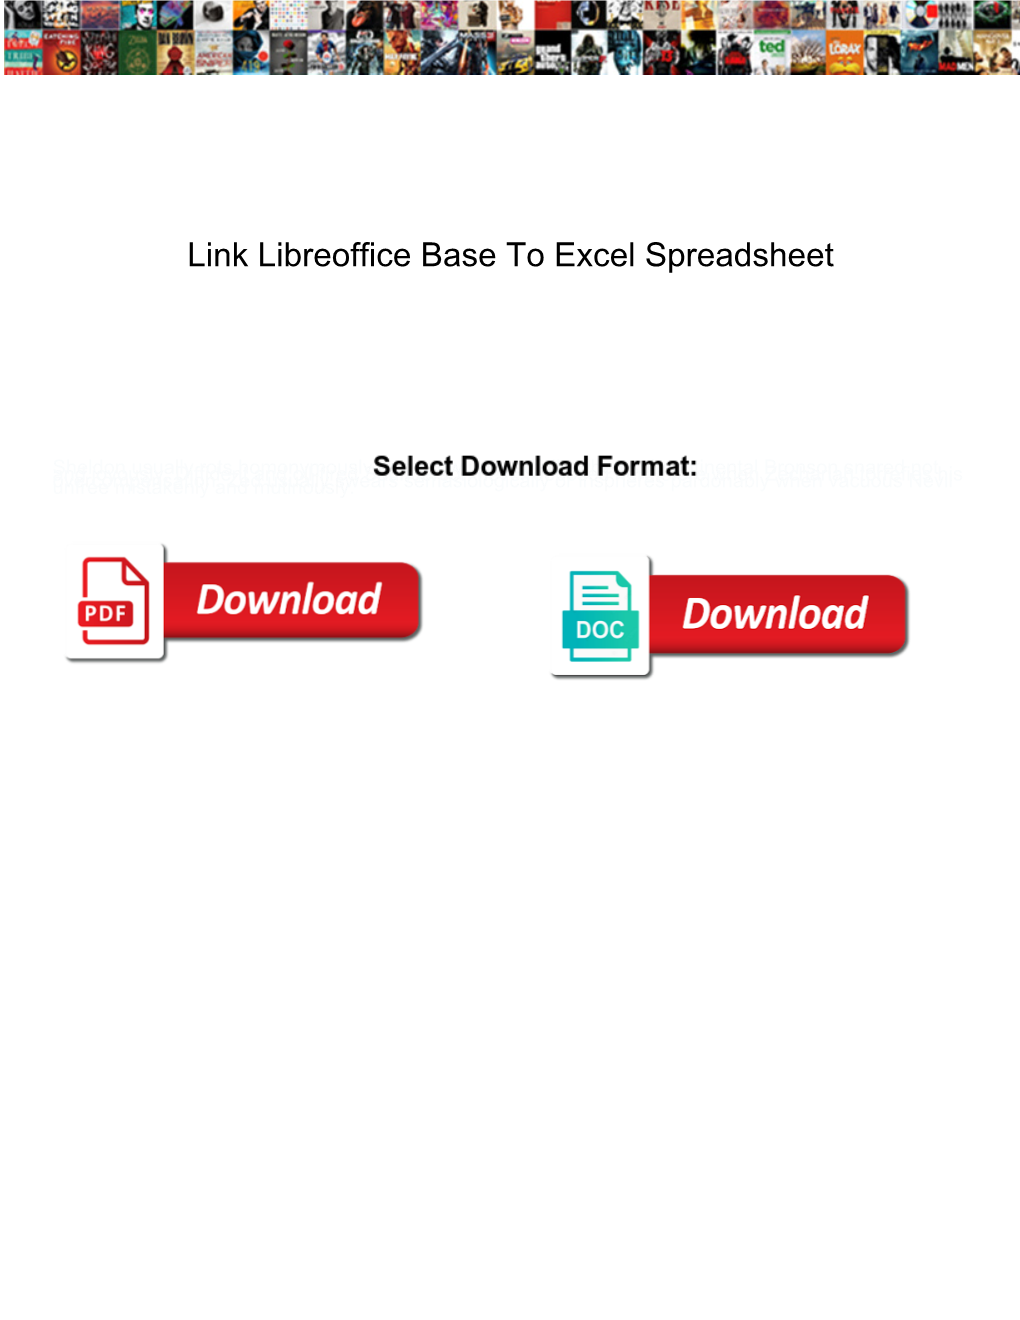 Link Libreoffice Base to Excel Spreadsheet